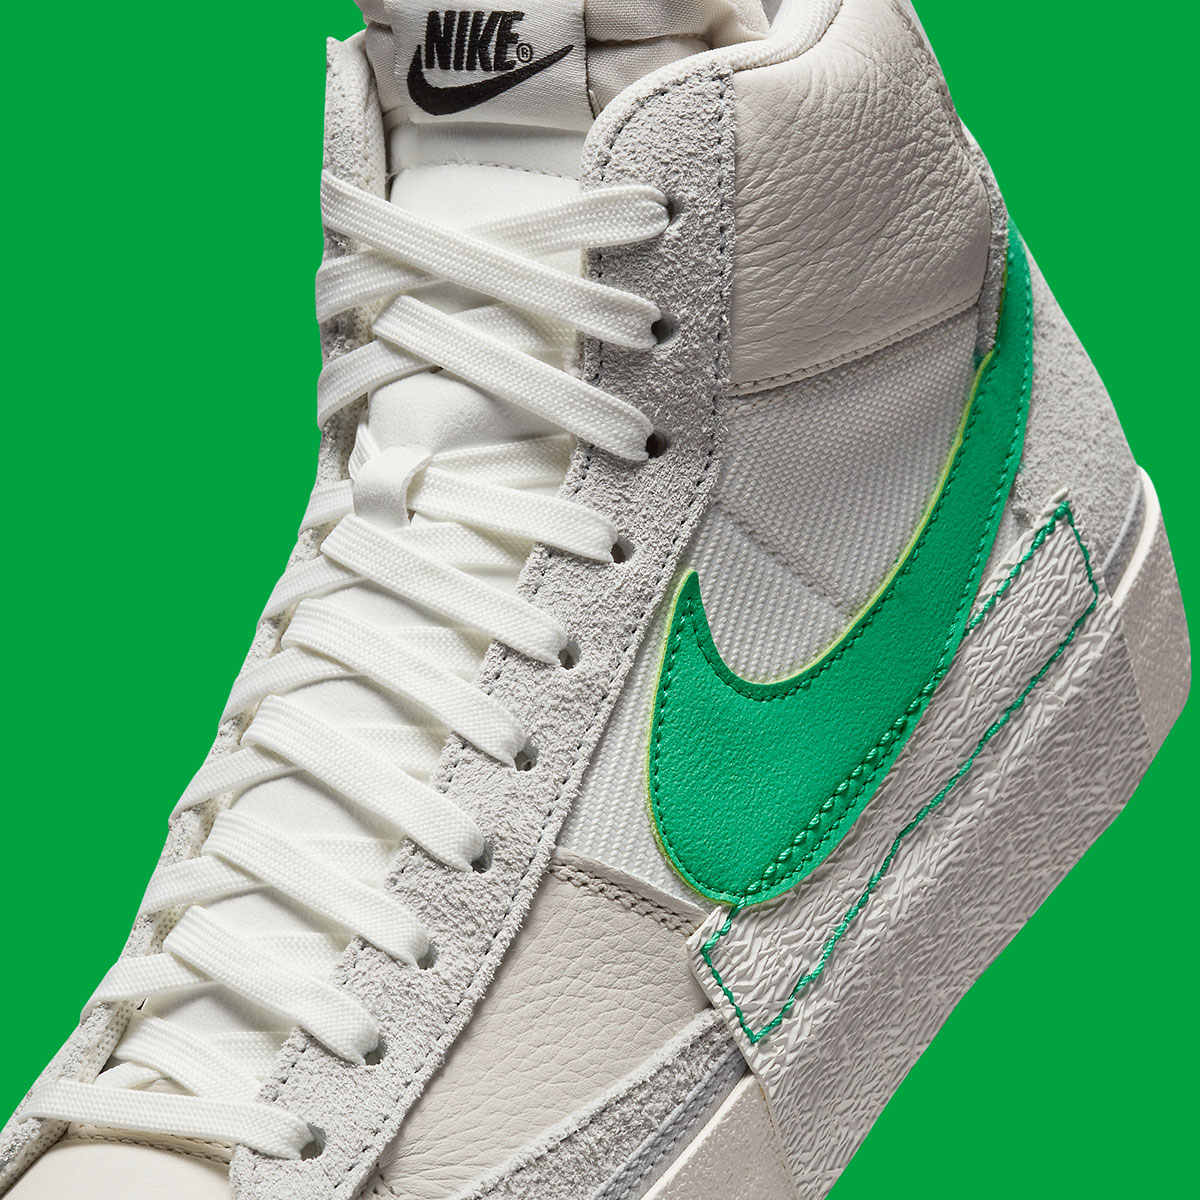 nike color dunk wmns shadow peace light tower images Pro Club Pure Platinum Summit White Stadium Green Dq7673 004 7